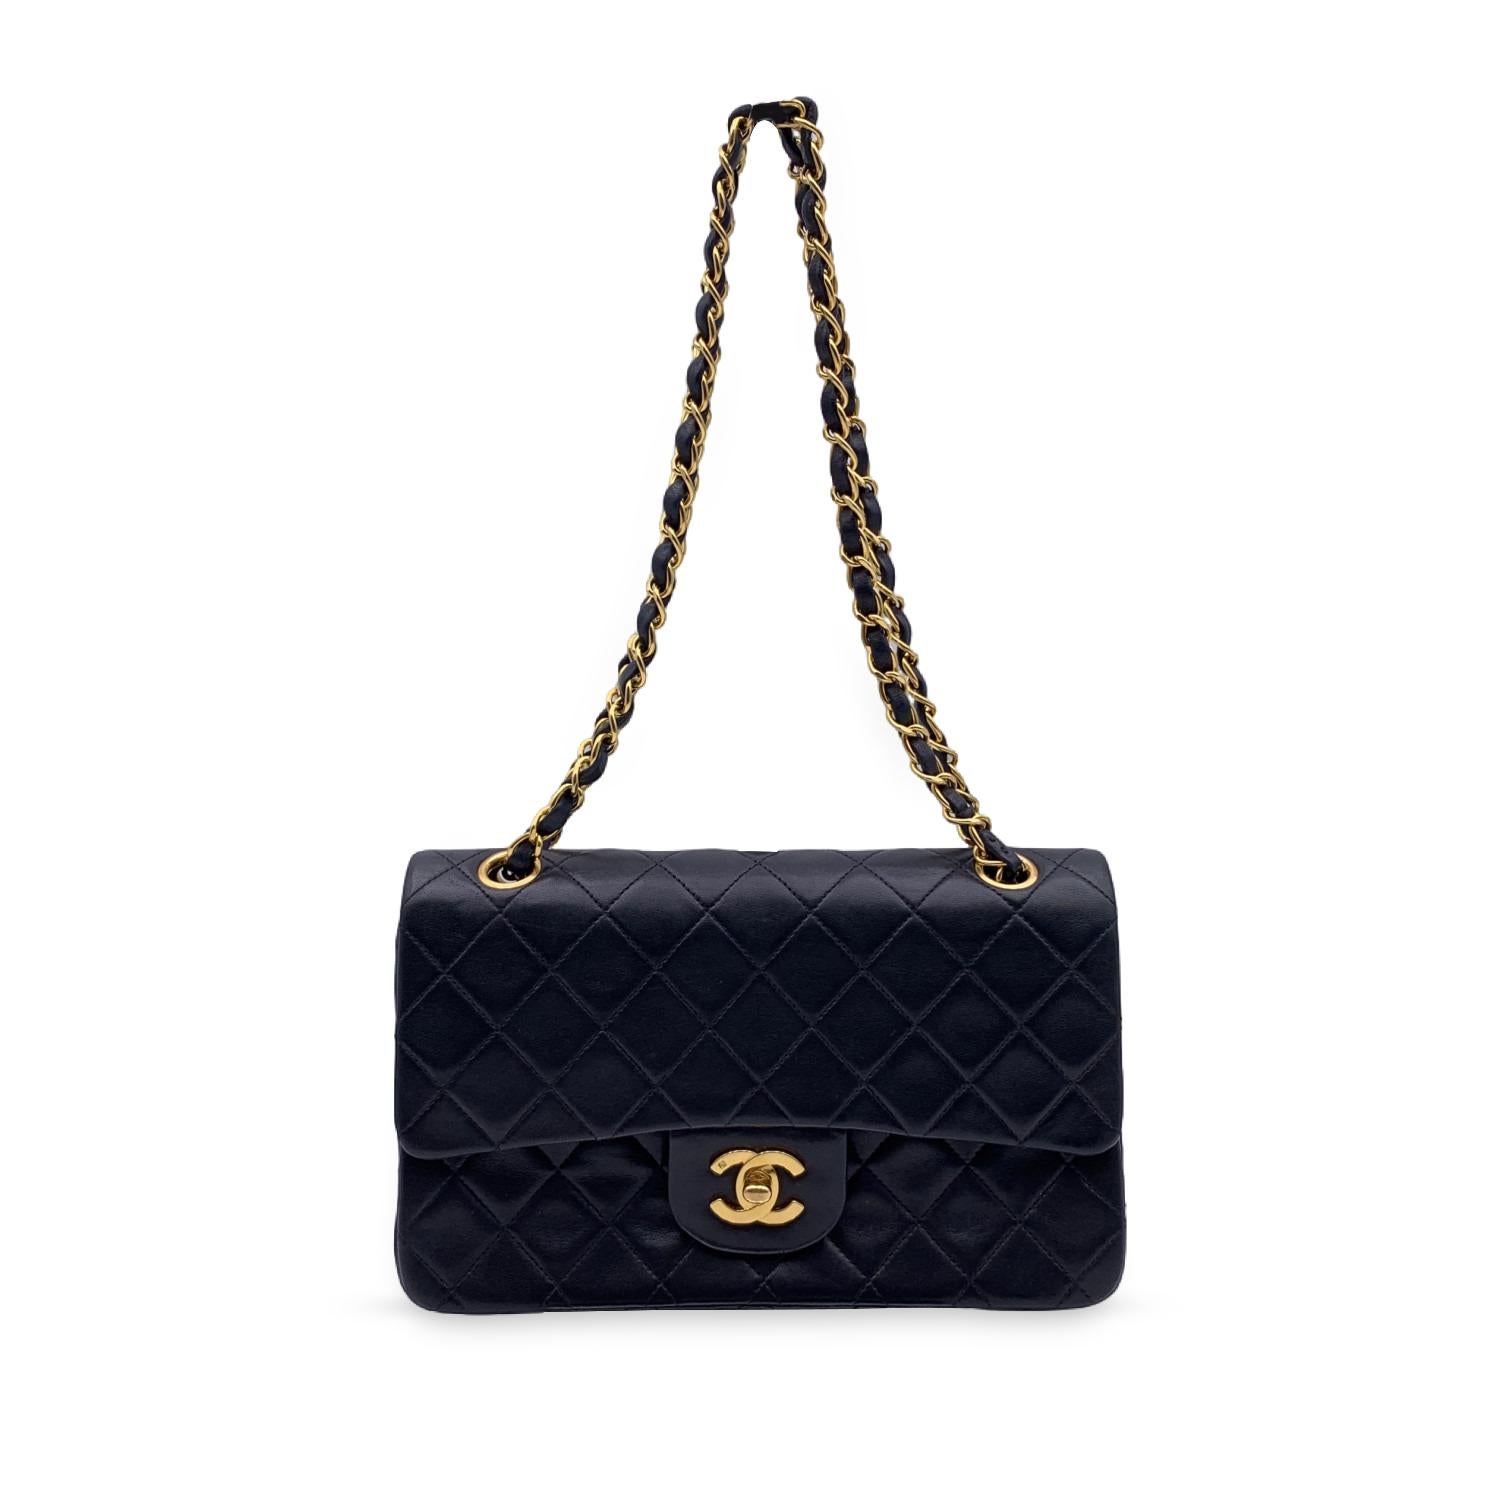 Chanel 'Timeless Classic 2.55' Quilted Double Flap 2.55 Bag in Black color. Periord/Era: 1997-1999 Features double 'CC' turn lock closure and double flap interior. 1 open pocket under the flap. Gorgeous gold metal strap with interwoven leather; can